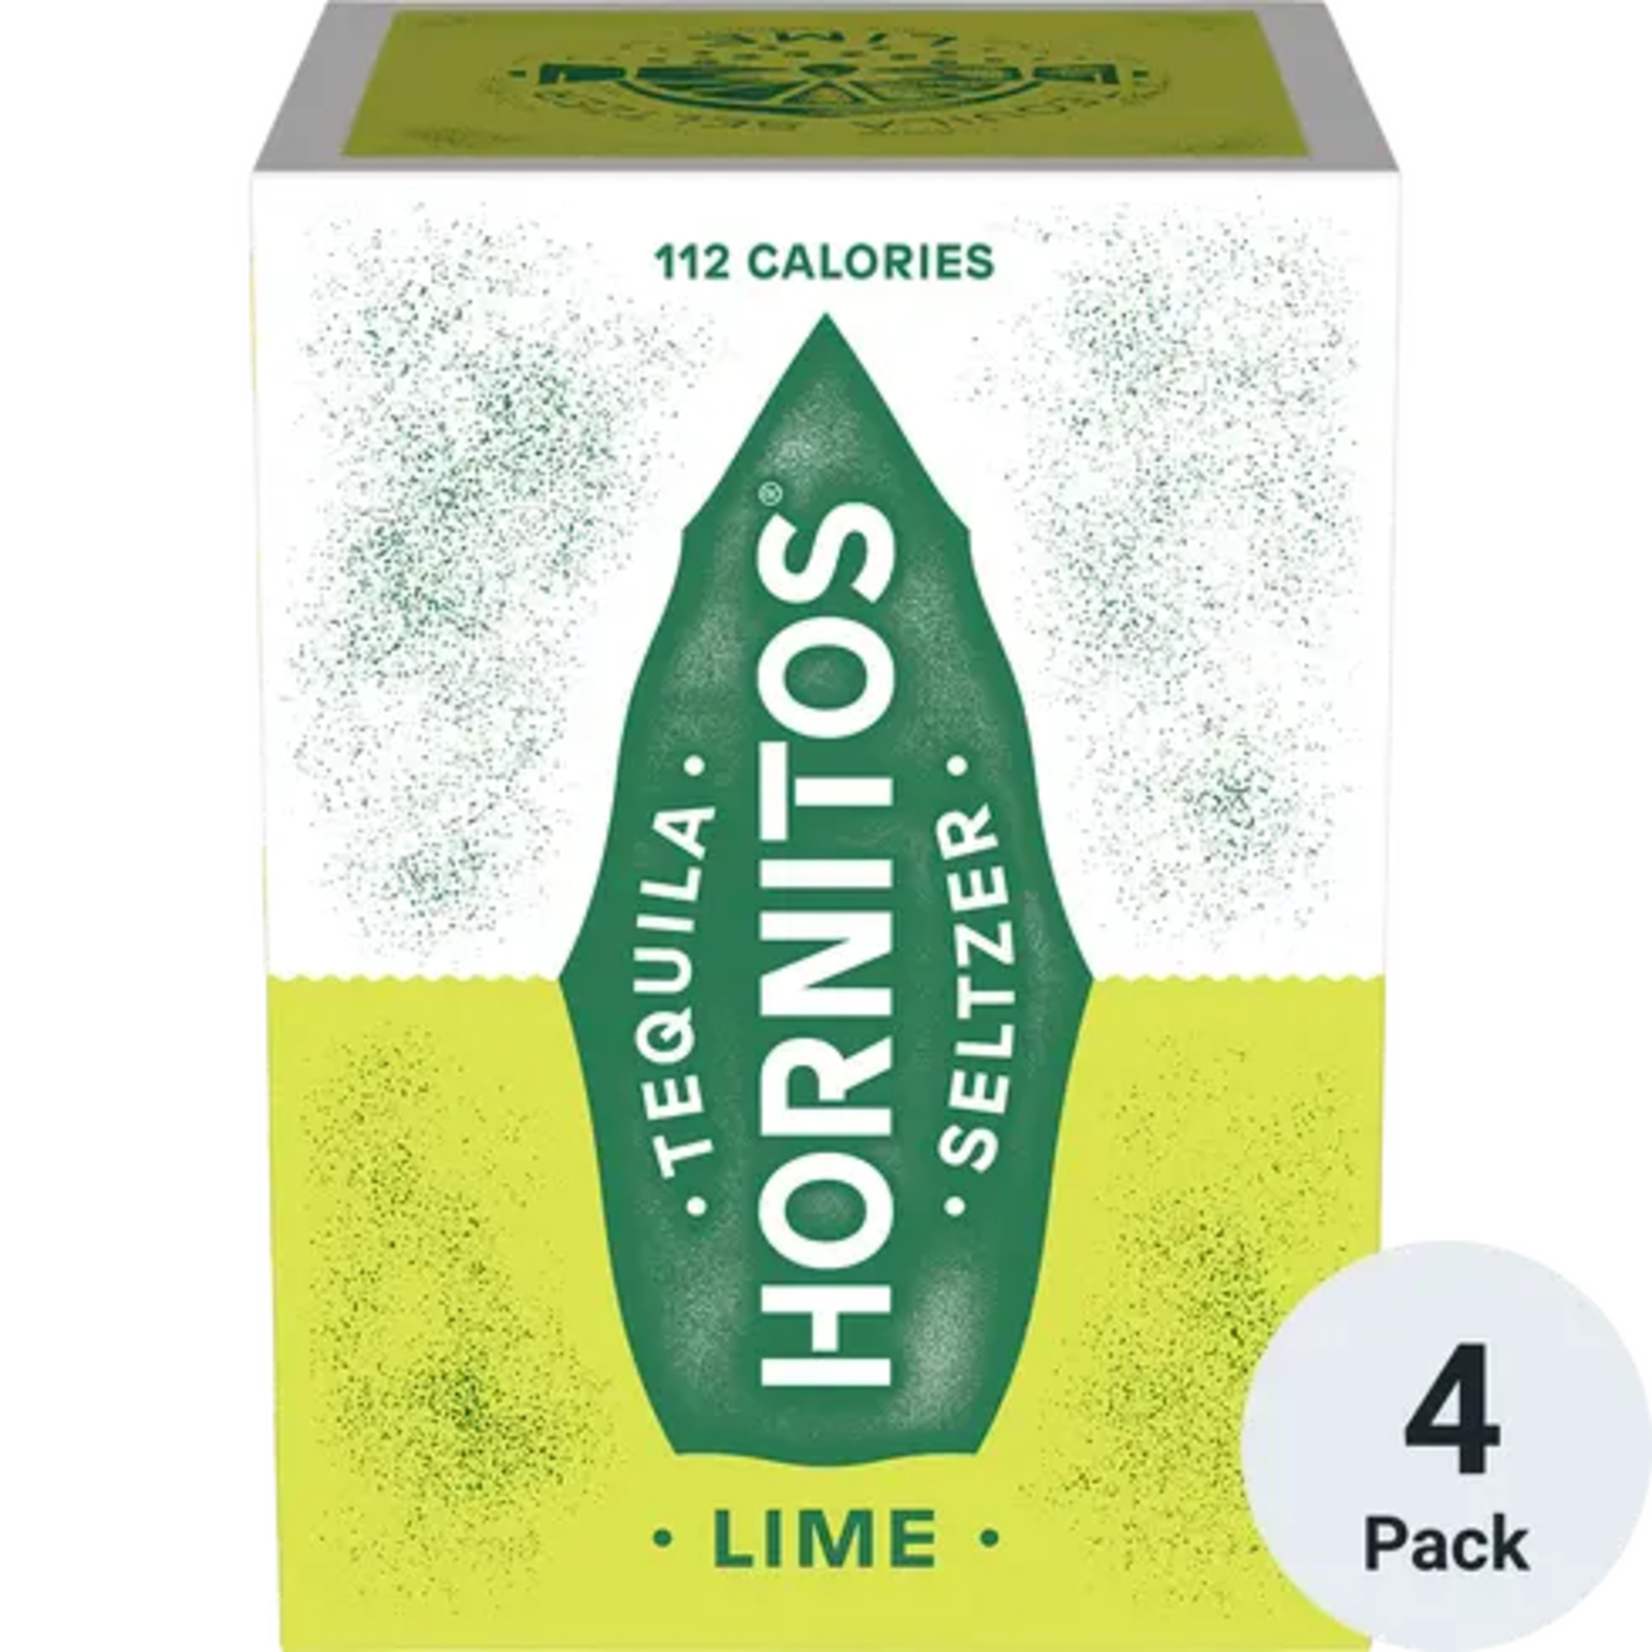 Hornitos Tequila Hornitos RTD Lime Flavored Tequila Seltzer 10Proof 4pk 12oz Cans